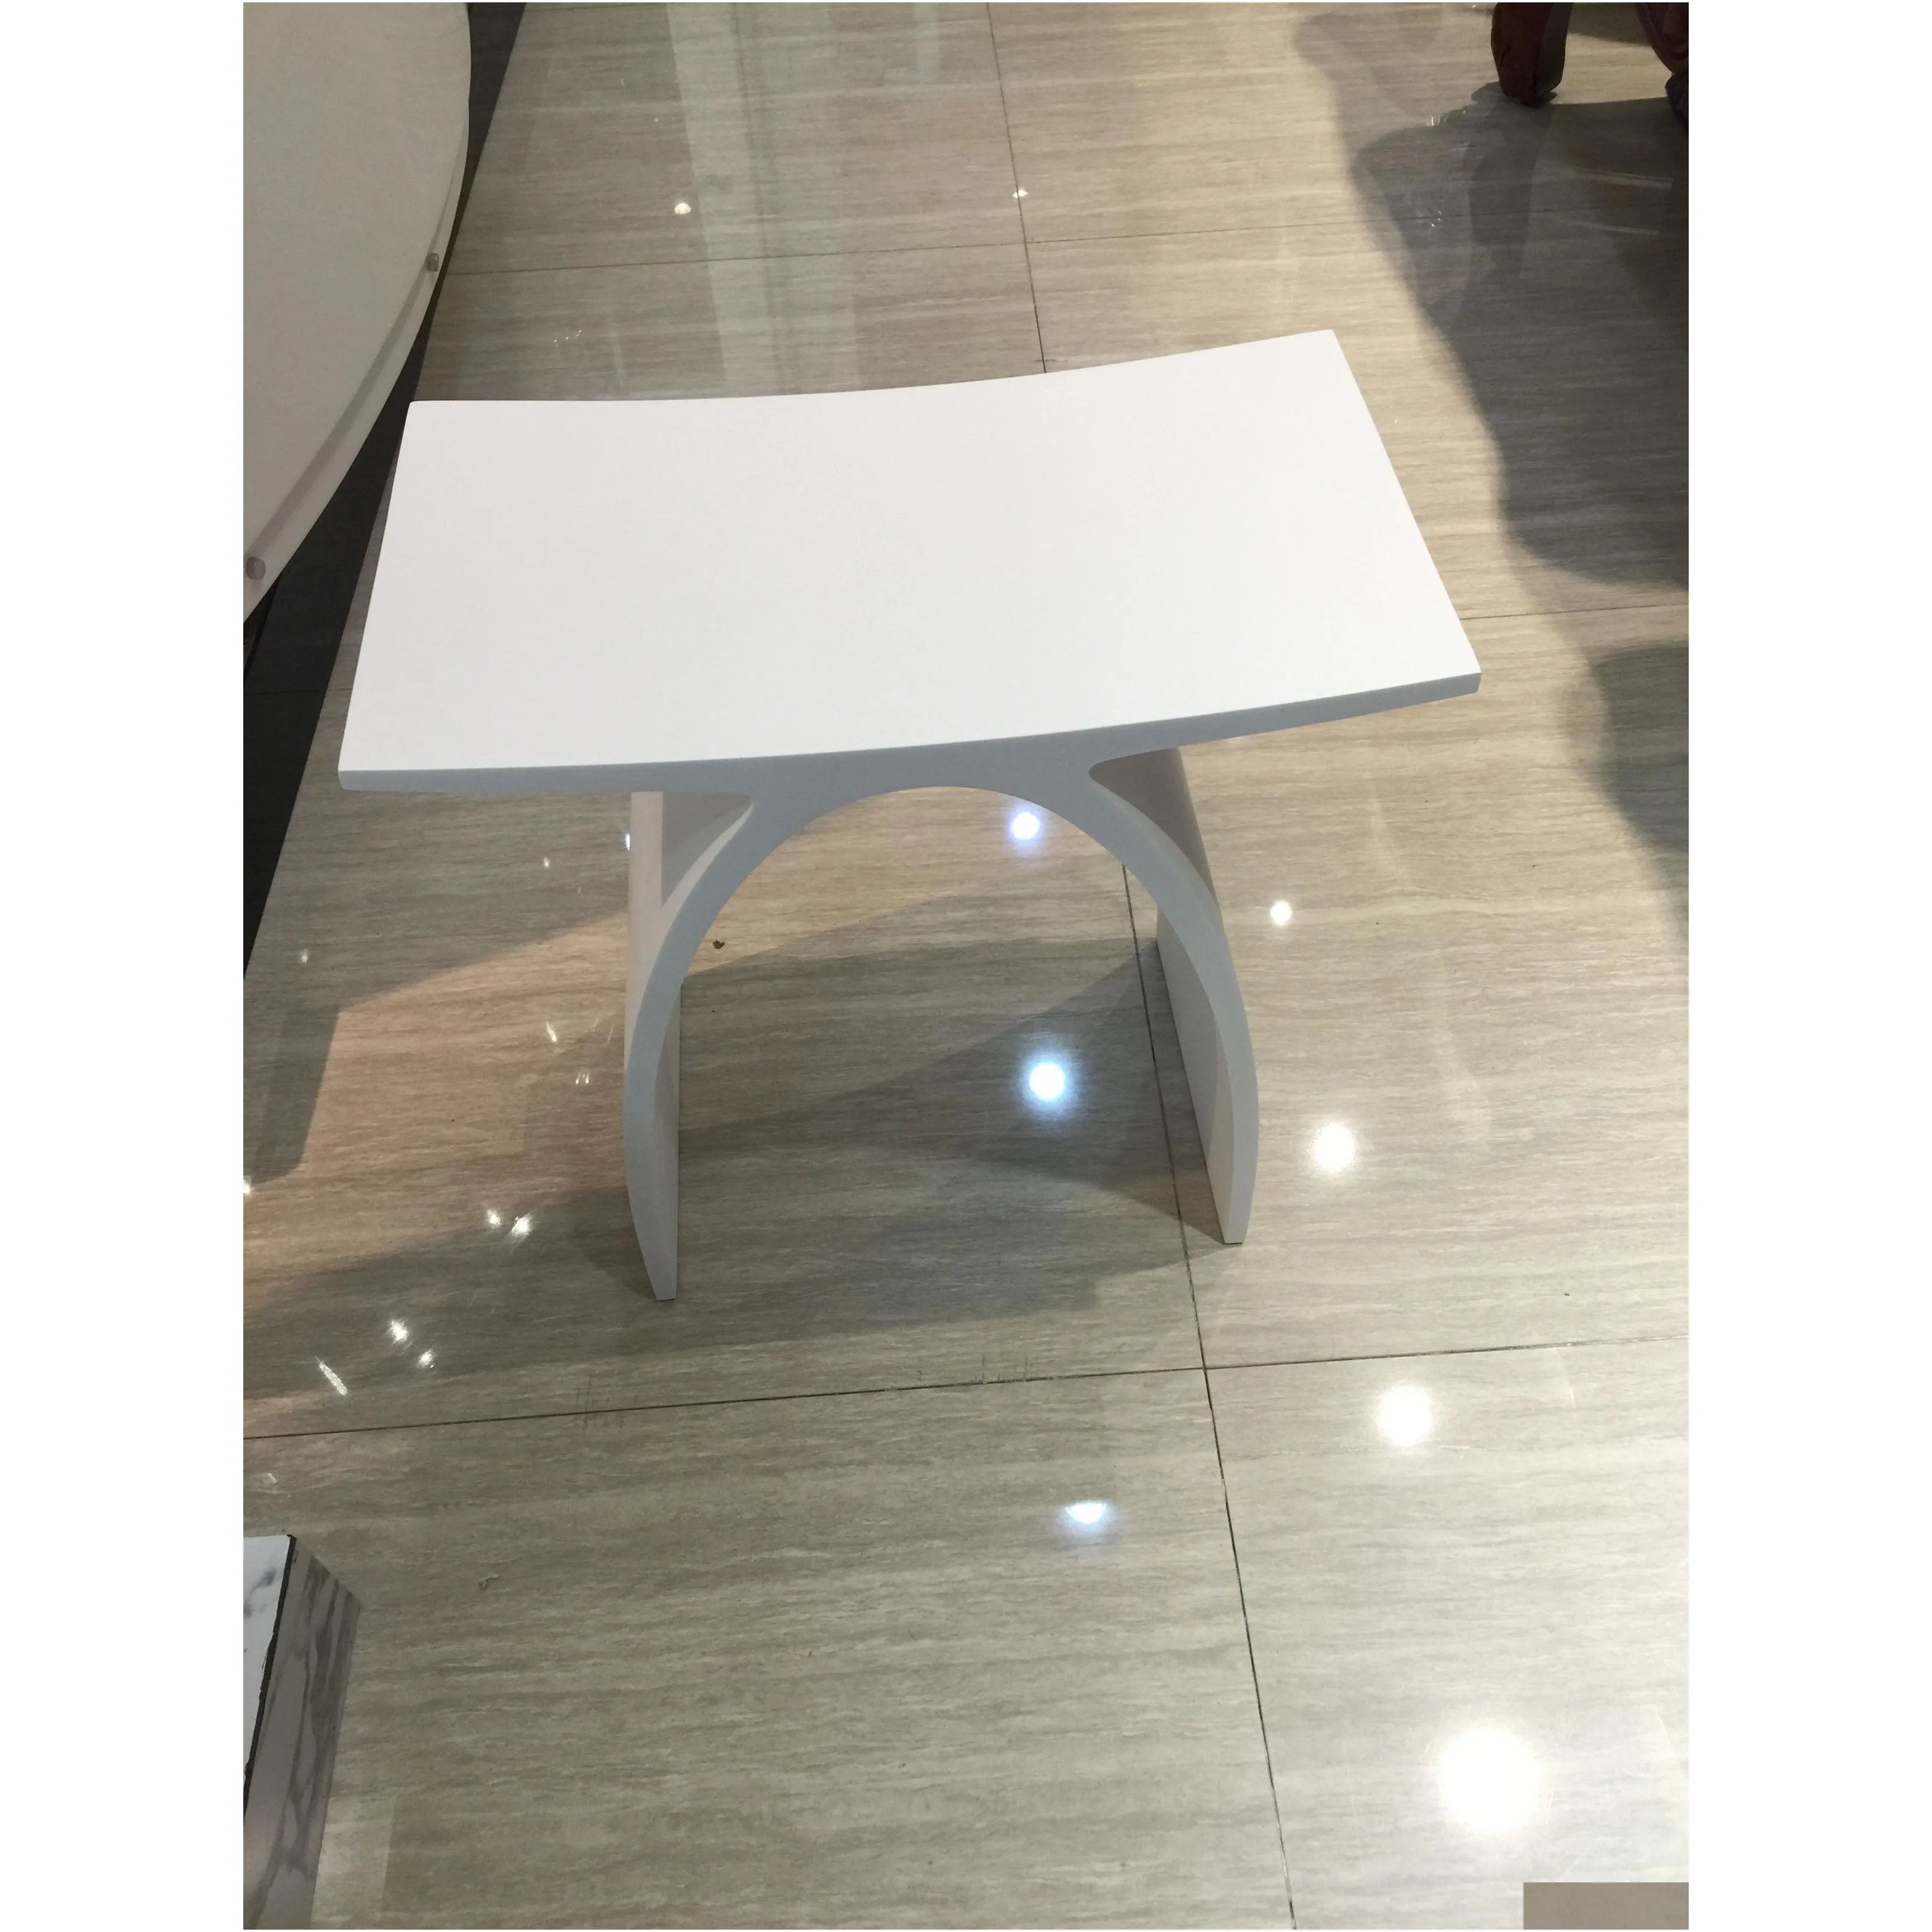 bathroom stool modern curved design furniture bench seat acrylic solid surface stone chair 0102